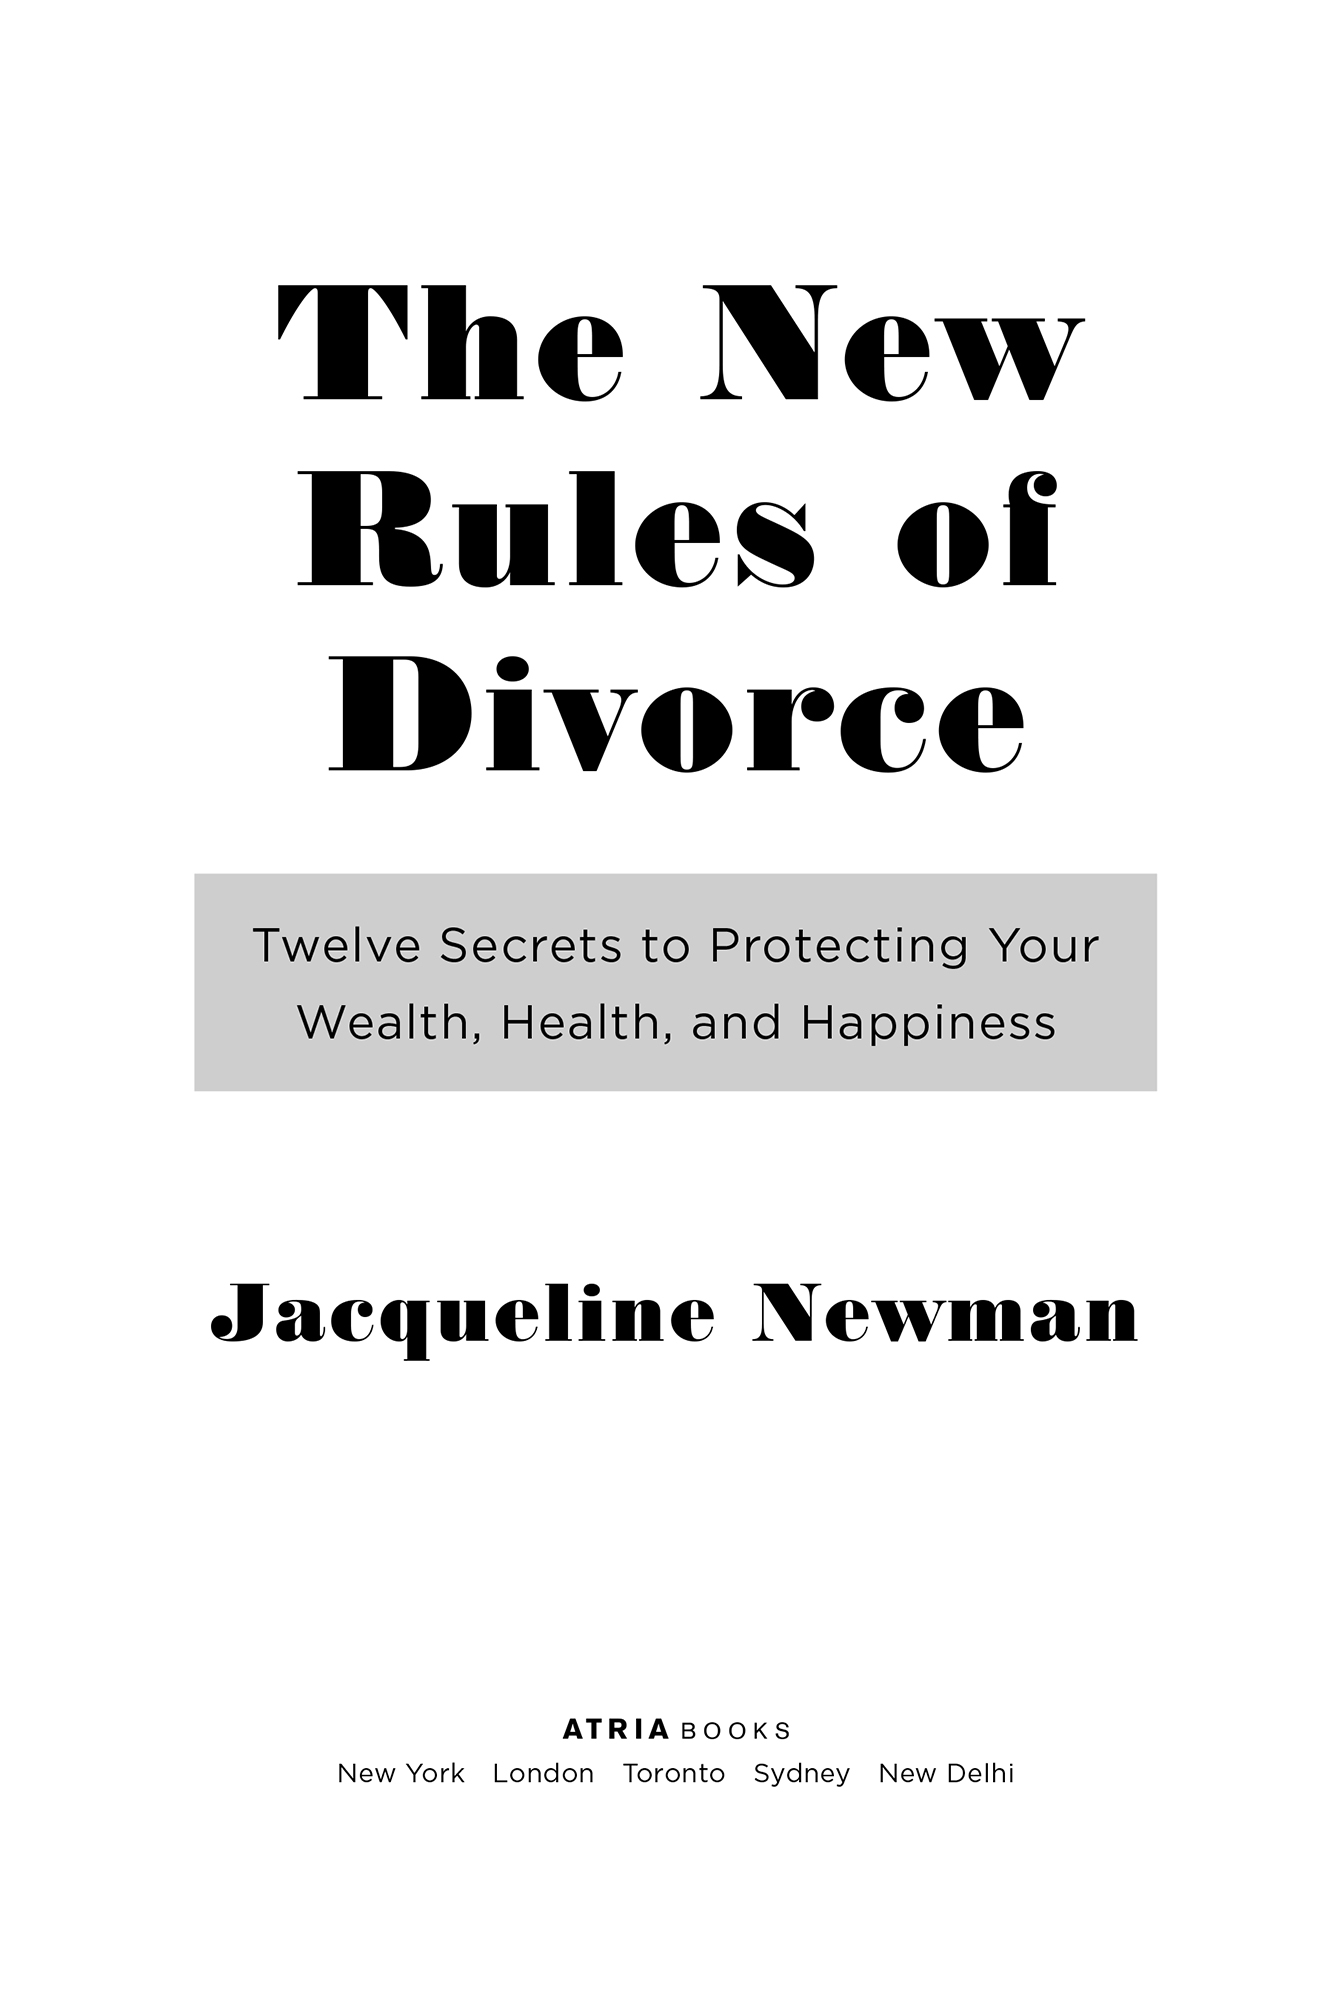 The new rules of divorce twelve secrets to protecting your wealth health and happiness - image 2